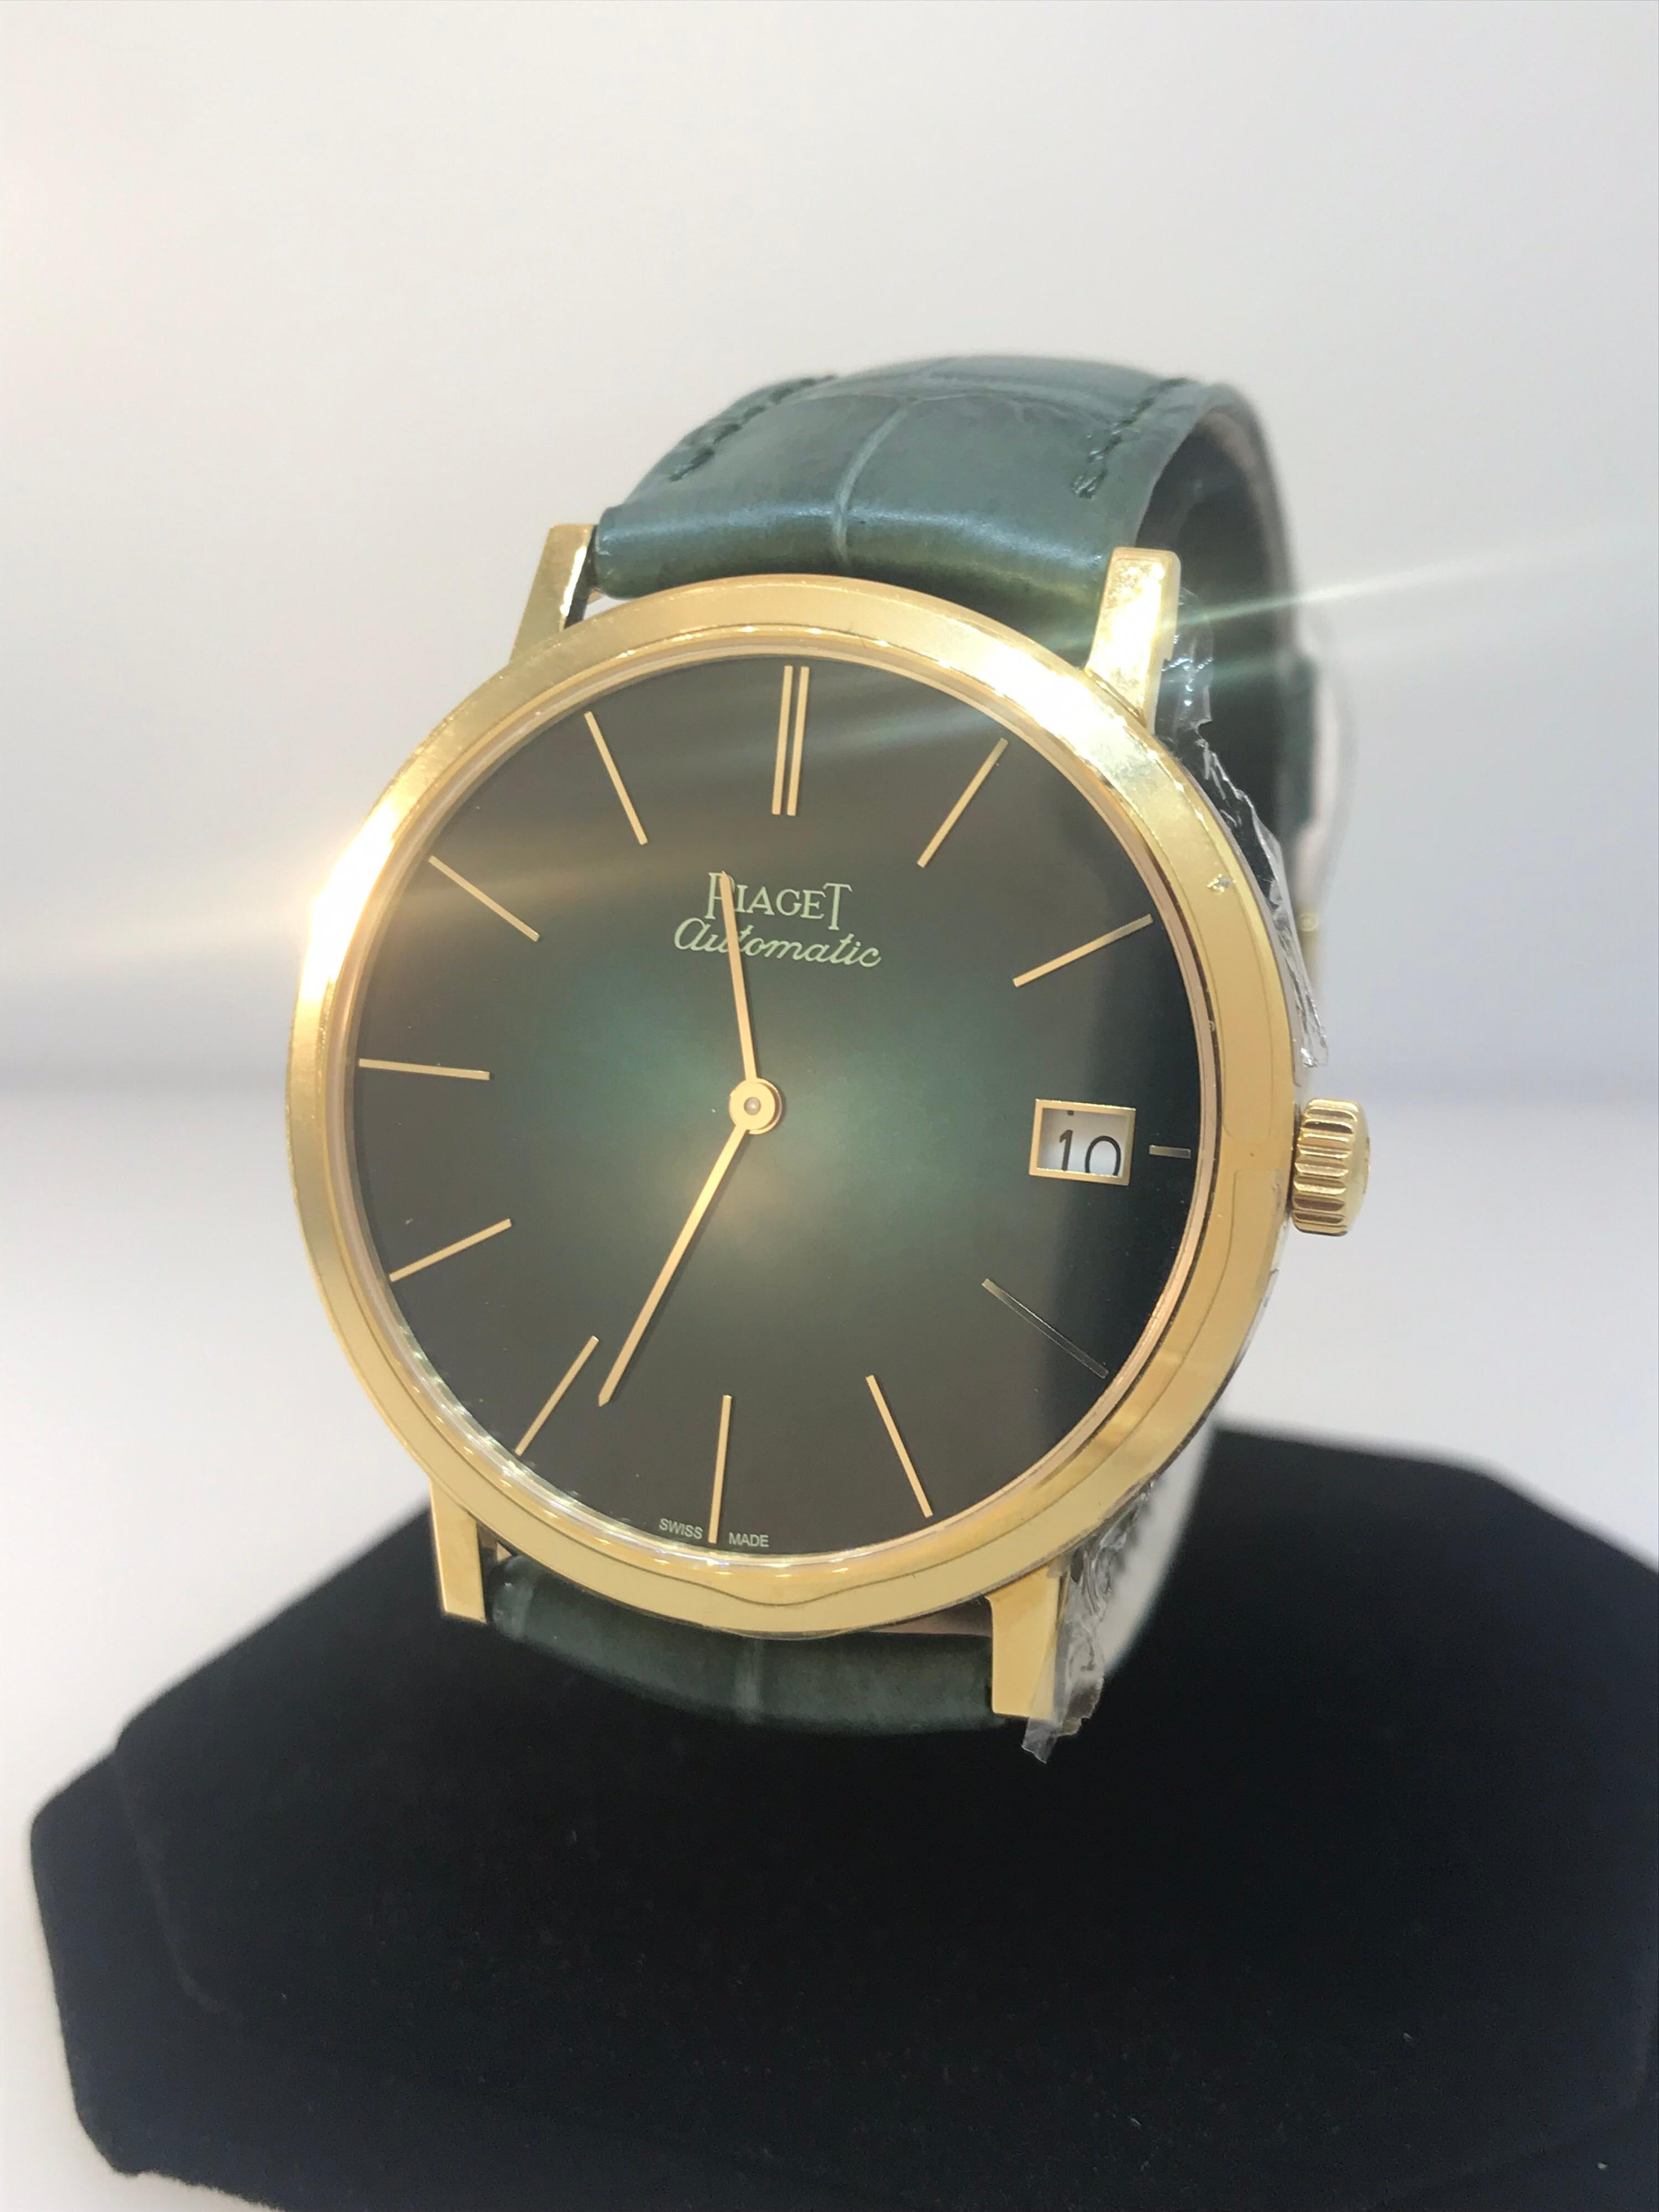 Piaget Altiplano Men's Watch

Model Number: G0A42052

100% Authentic

Brand New 

Comes with original Piaget box and warranty

18 Karat Yellow Gold Case & Buckle

Green Dial

Case Diameter: 40mm

Green Alligator leather band

Tang Buckle

Retails